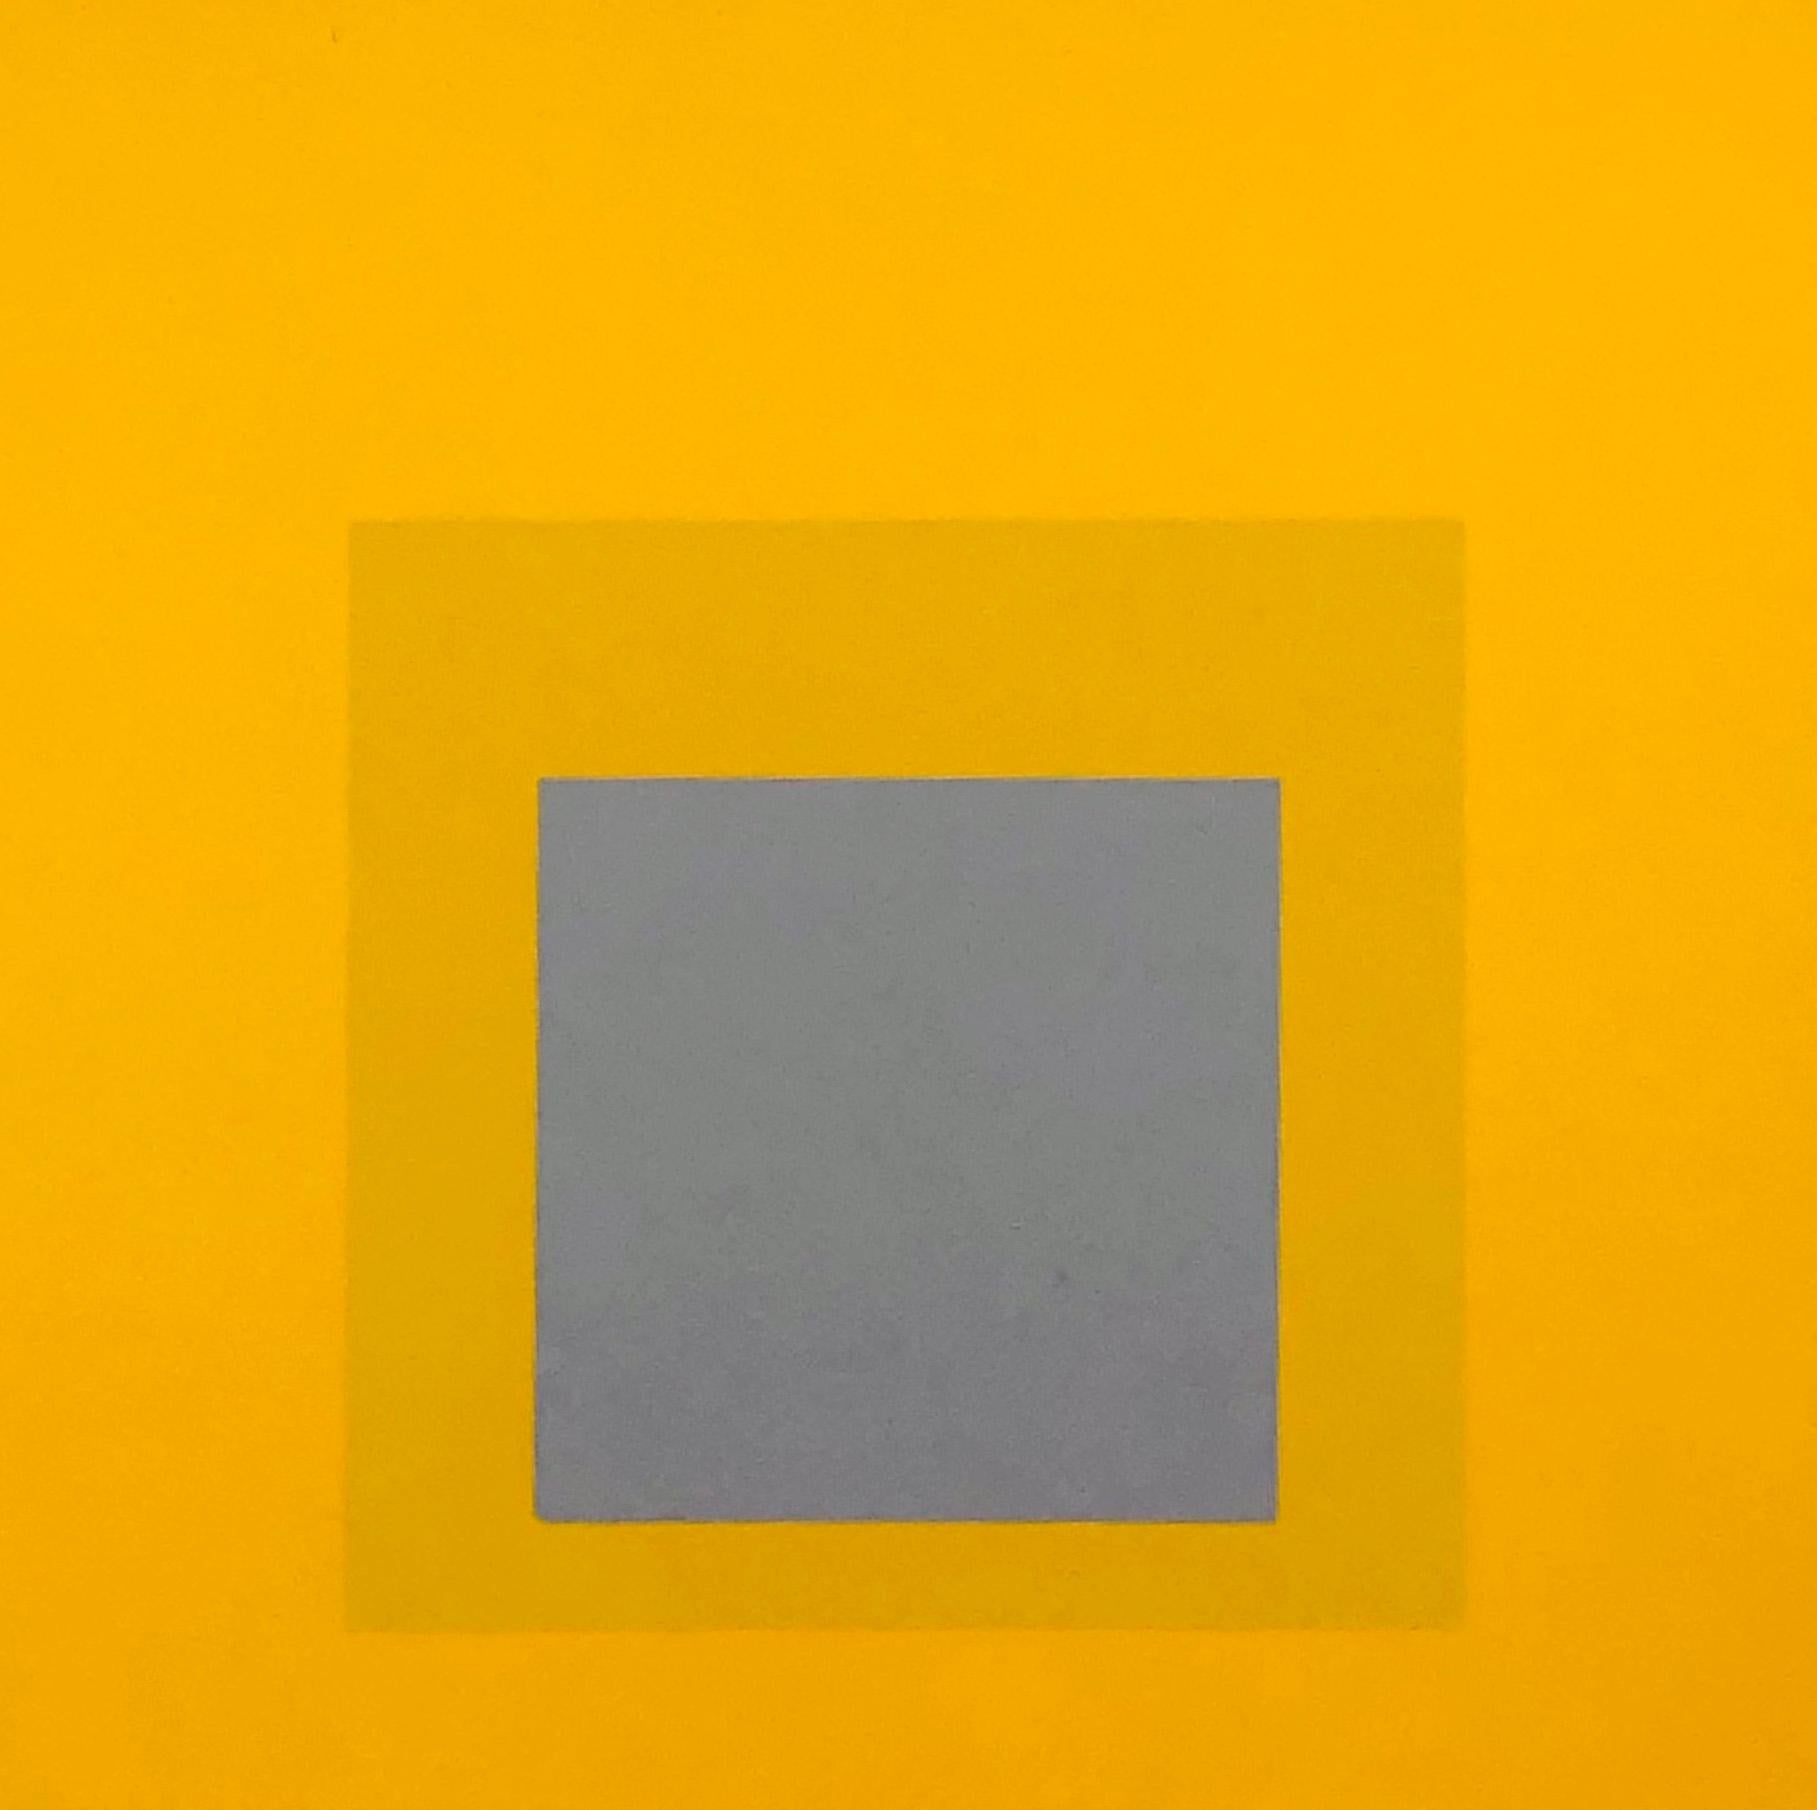 (after) Josef Albers Abstract Print - Albers Homage to the Square screen-print 1977 (Josef Albers prints) 